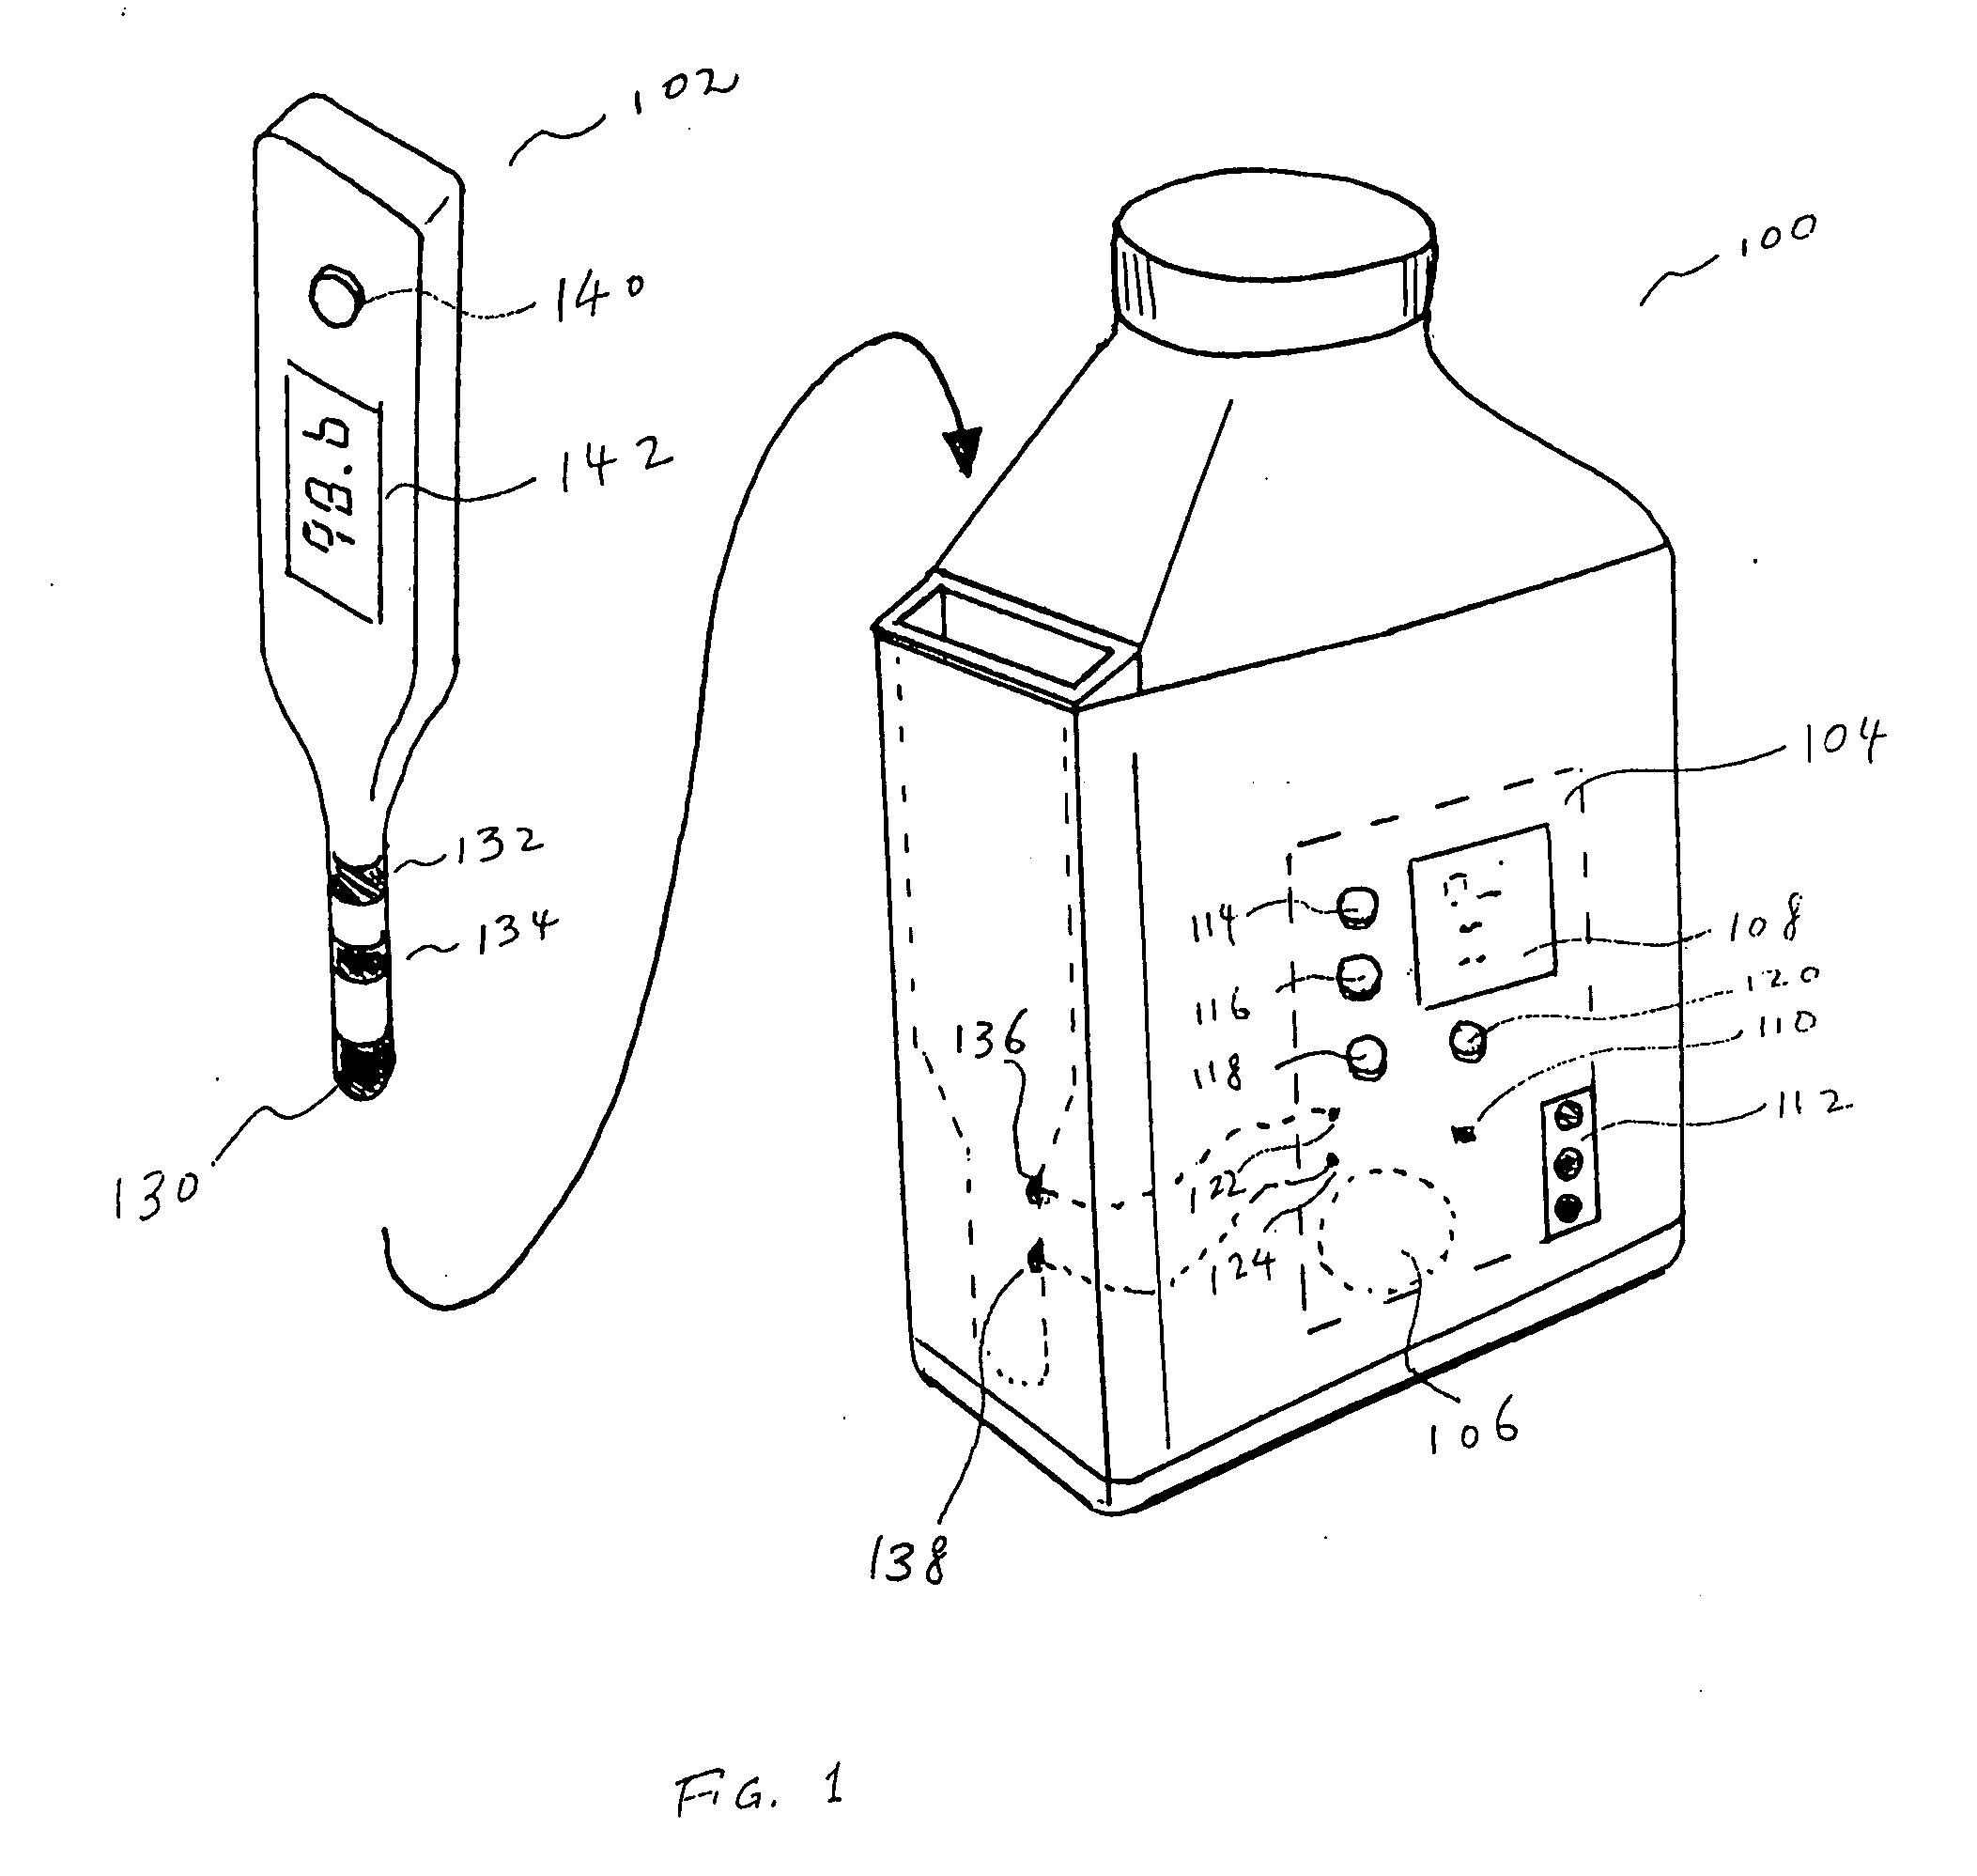 Portable container with speaker attached